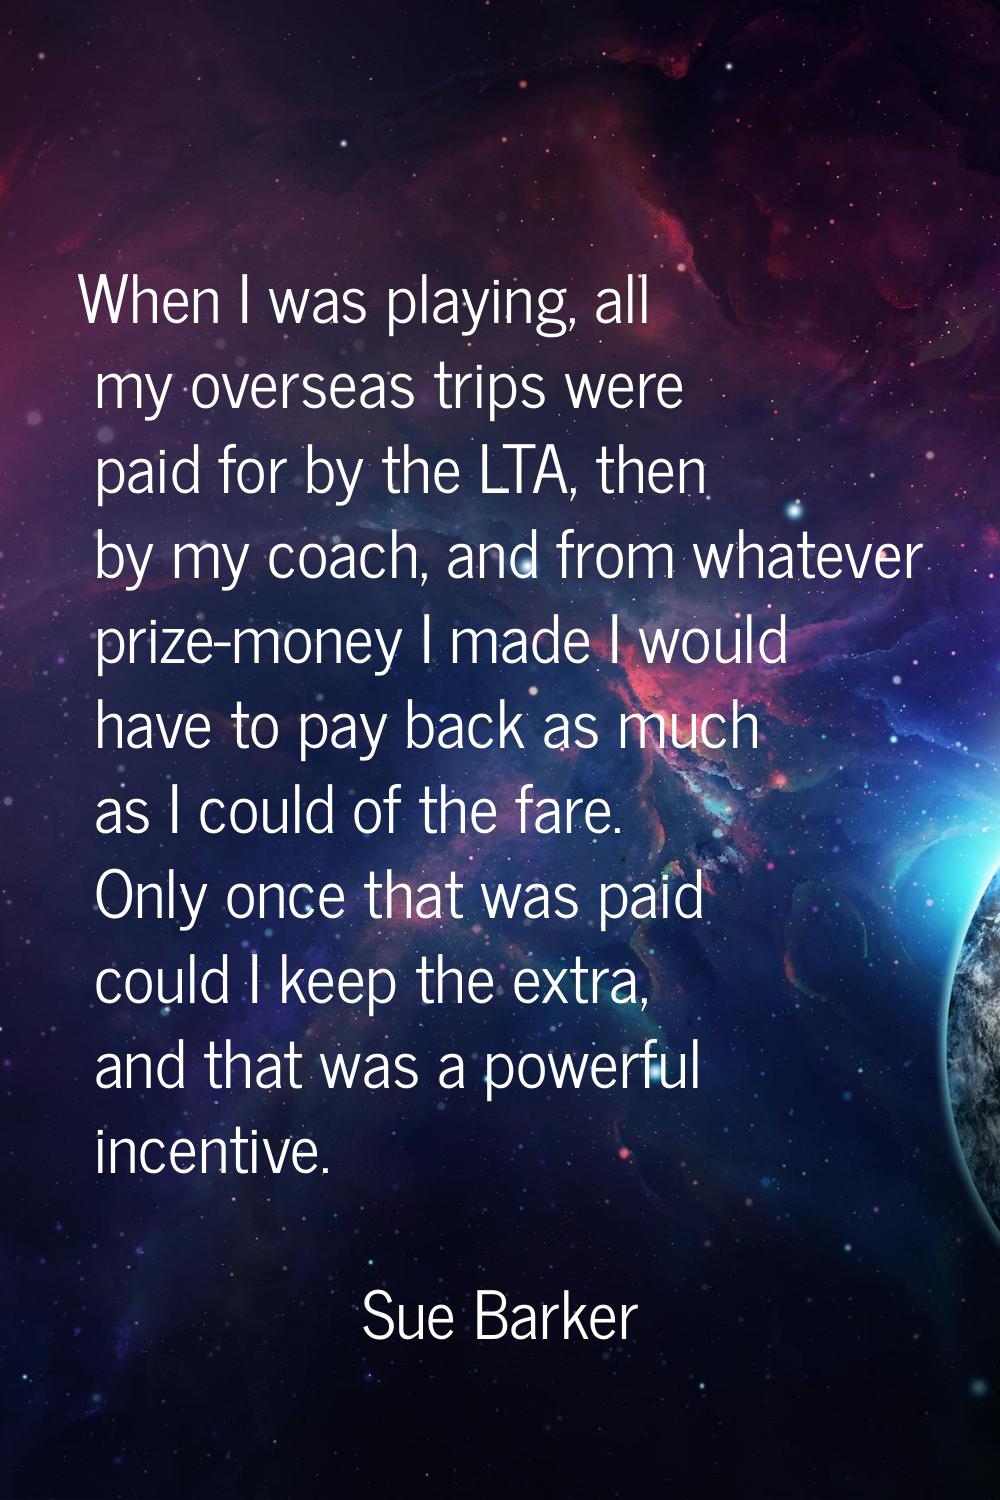 When I was playing, all my overseas trips were paid for by the LTA, then by my coach, and from what